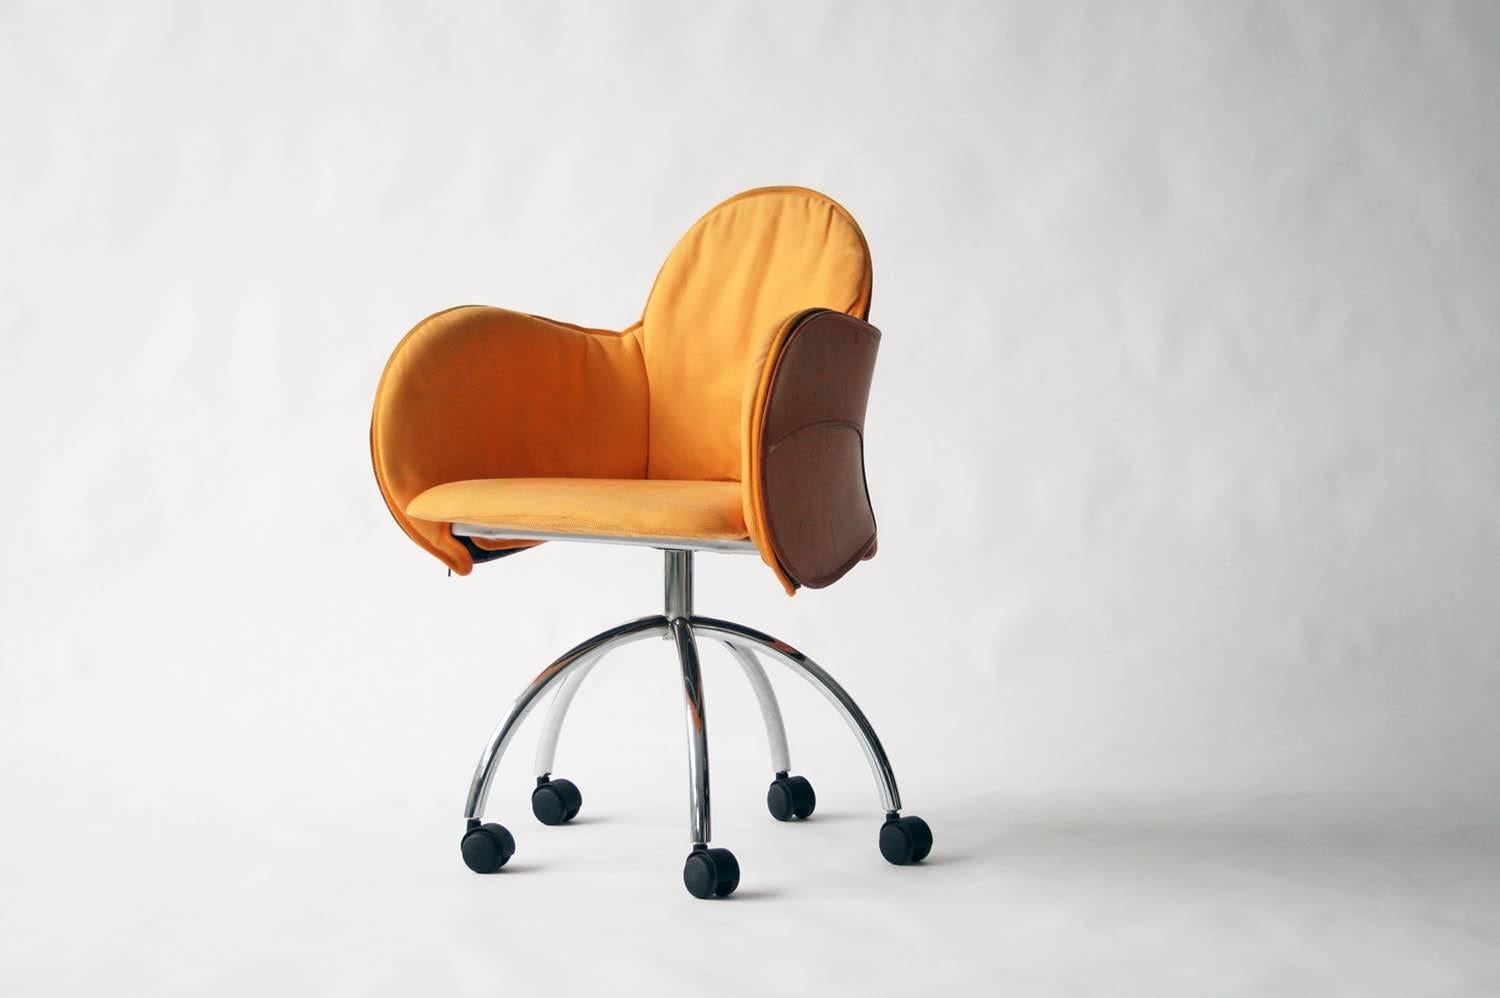 Designed in 1992  by Vico Magistretti for De Padova, Italy.  The Incisa swivel chair is the ideal seat for the corporate office and meeting room, but also for the desk of home. The chair is distinguished by its external seat leather upholstery,